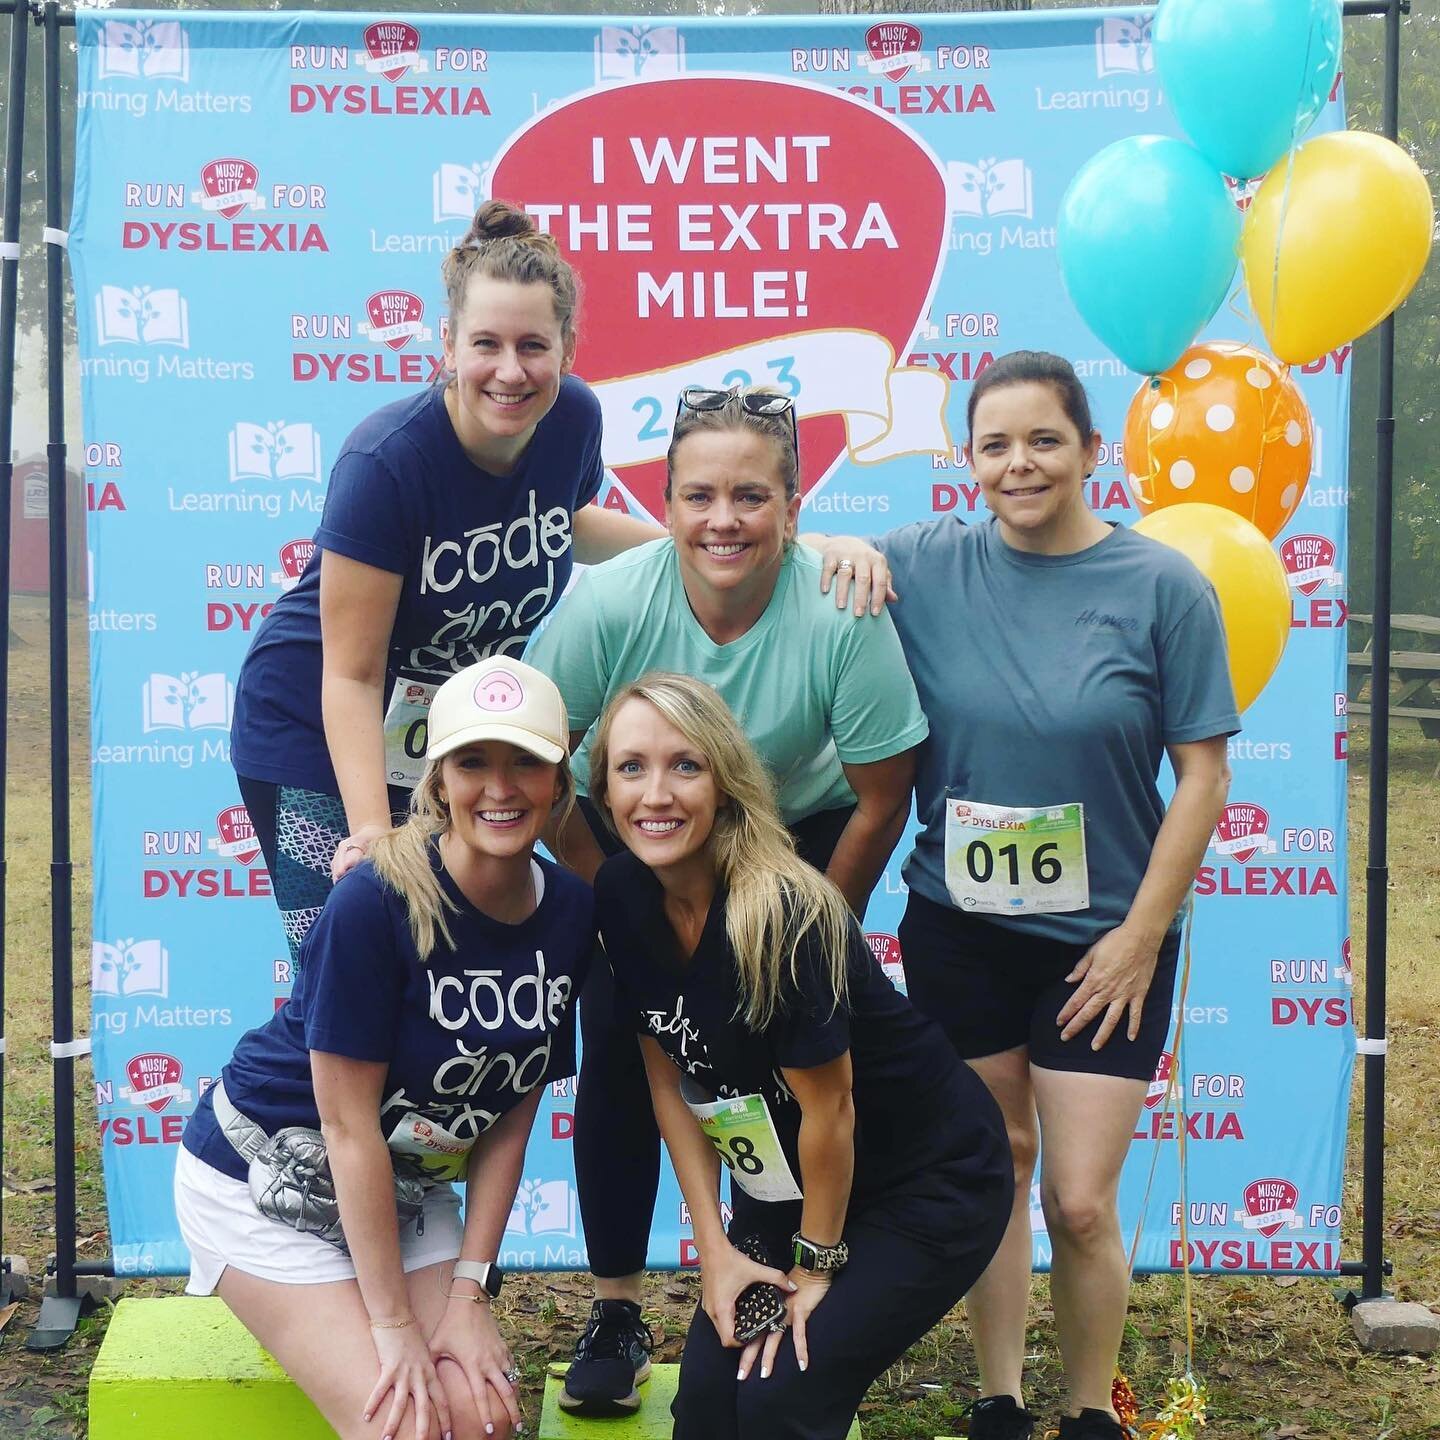 It was a foggy morning at Shelby Park, but our Hoover Learning Group staff was still excited to participate in the Music City Run for Dyslexia today! 🏃🏼&zwj;♀️ #hooverlearninggroup #dyslexiarun #nashvilletn #shelbypark #team #coworkers #HLG #saturd